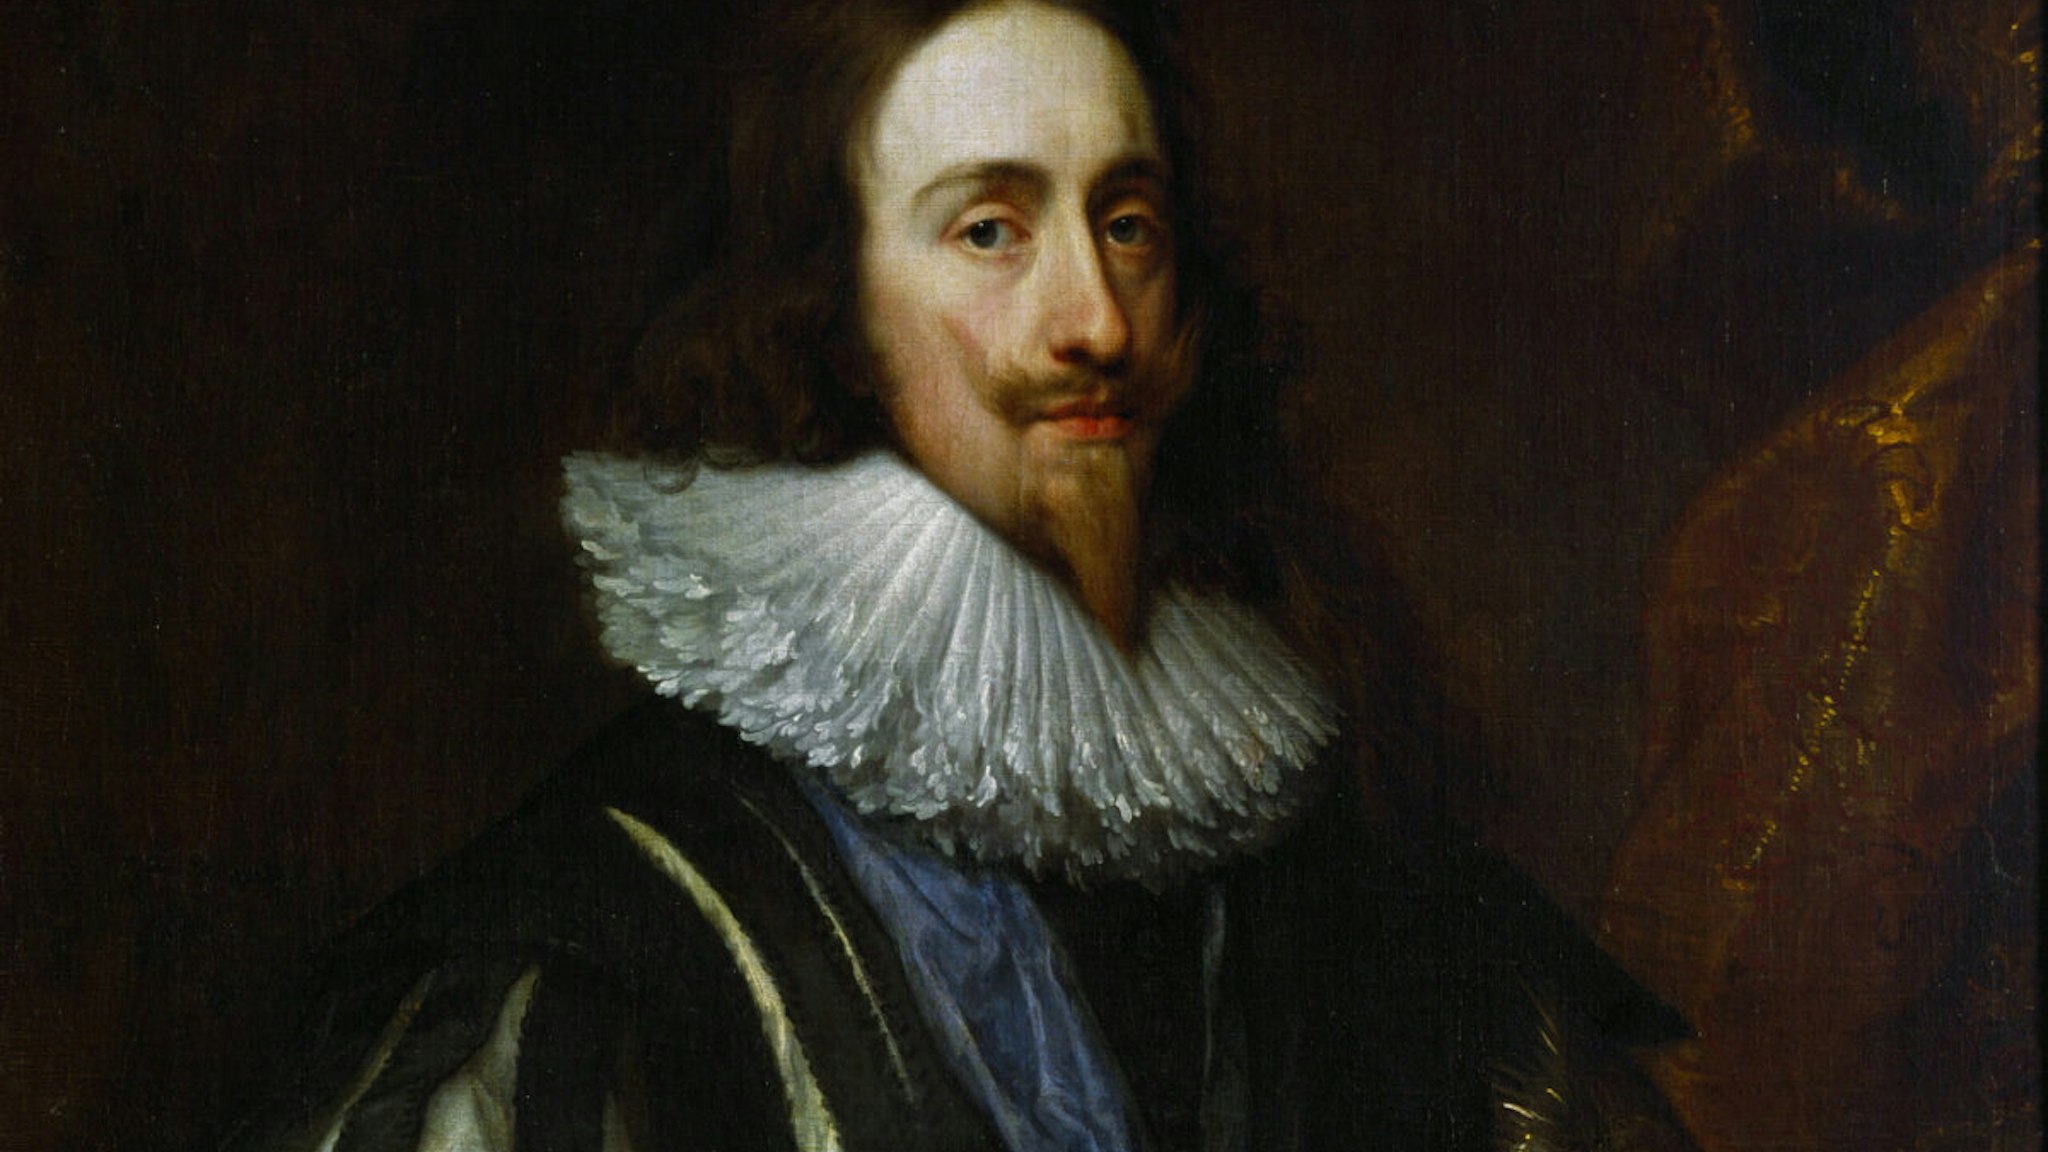 Charles I, King of England (1600-1649), son of James I and Anne of Denmark. Charles I was beheaded in London in 1649, upon order of Oliver Cromwell and his purged parliament